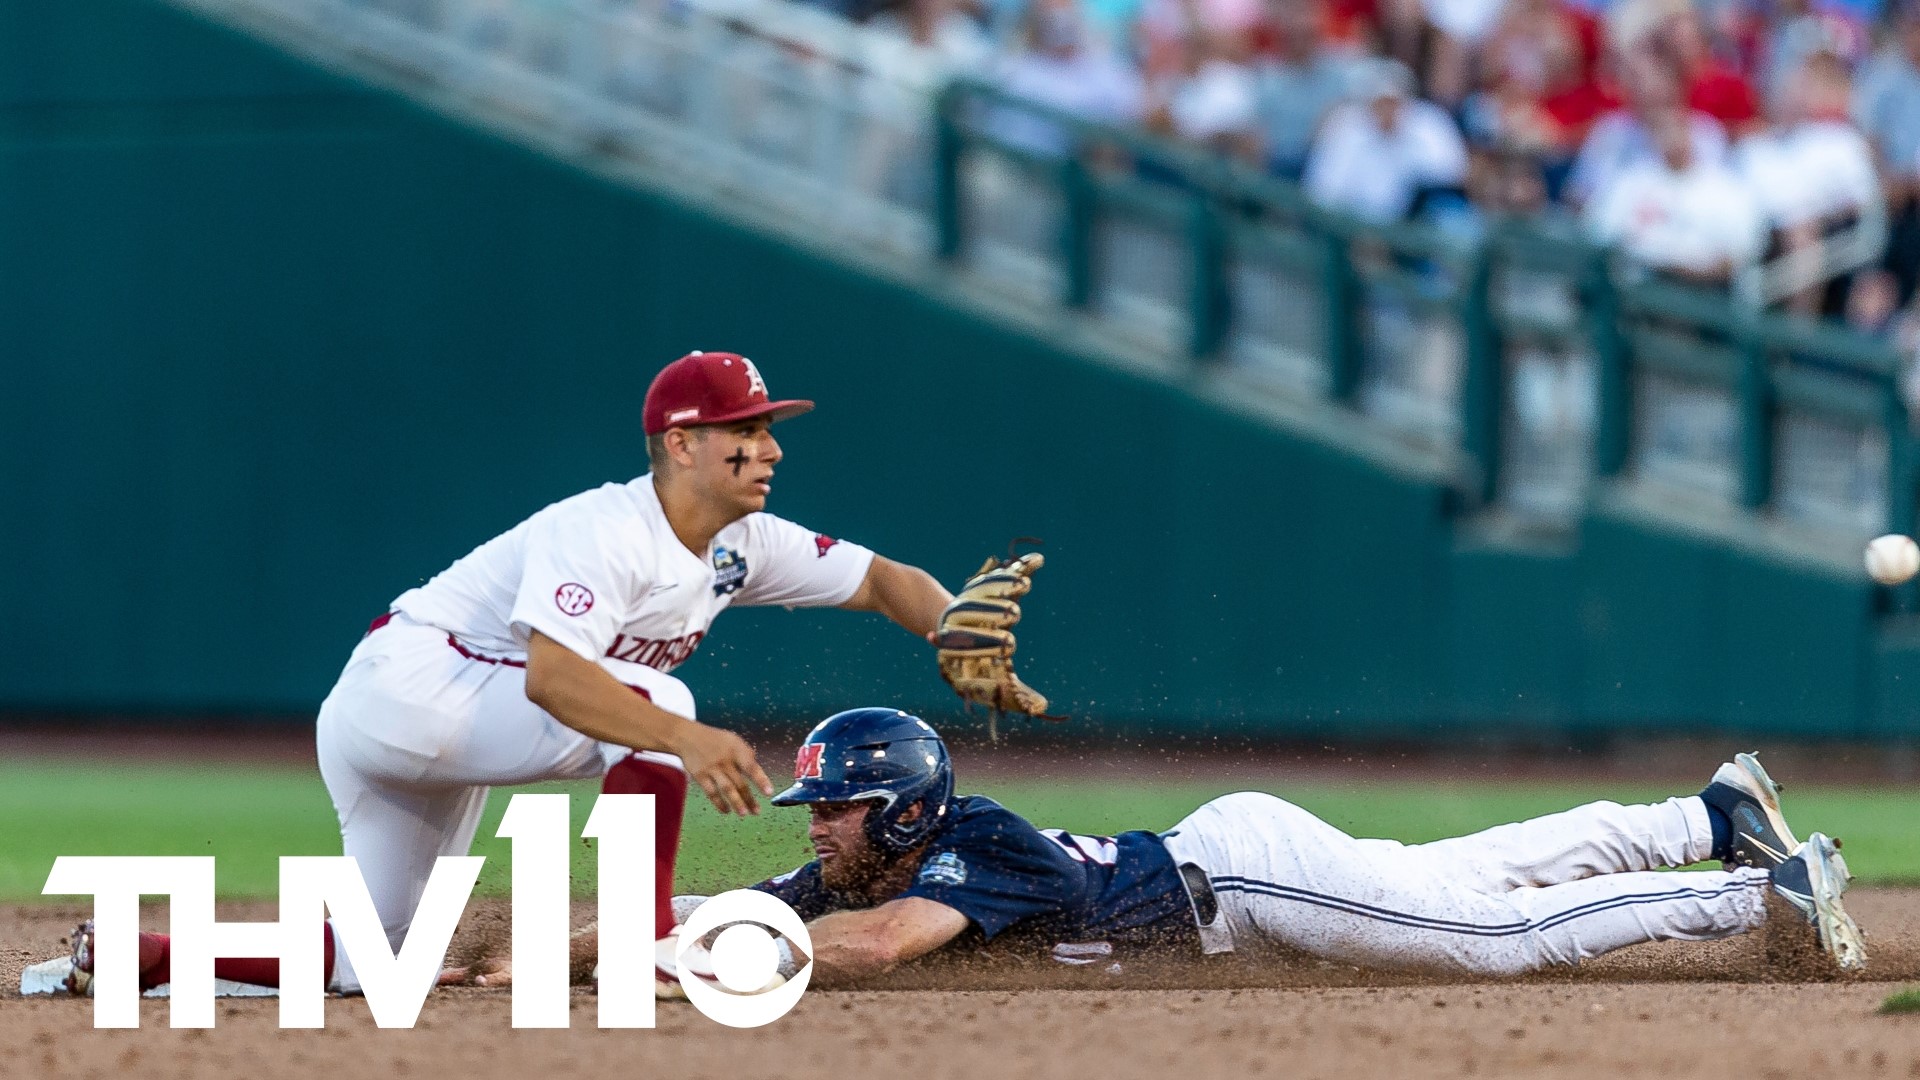 Arkansas fell to Ole Miss 13-5 at the College World Series. The Razorbacks will now take on Auburn on Tuesday at 6 PM.